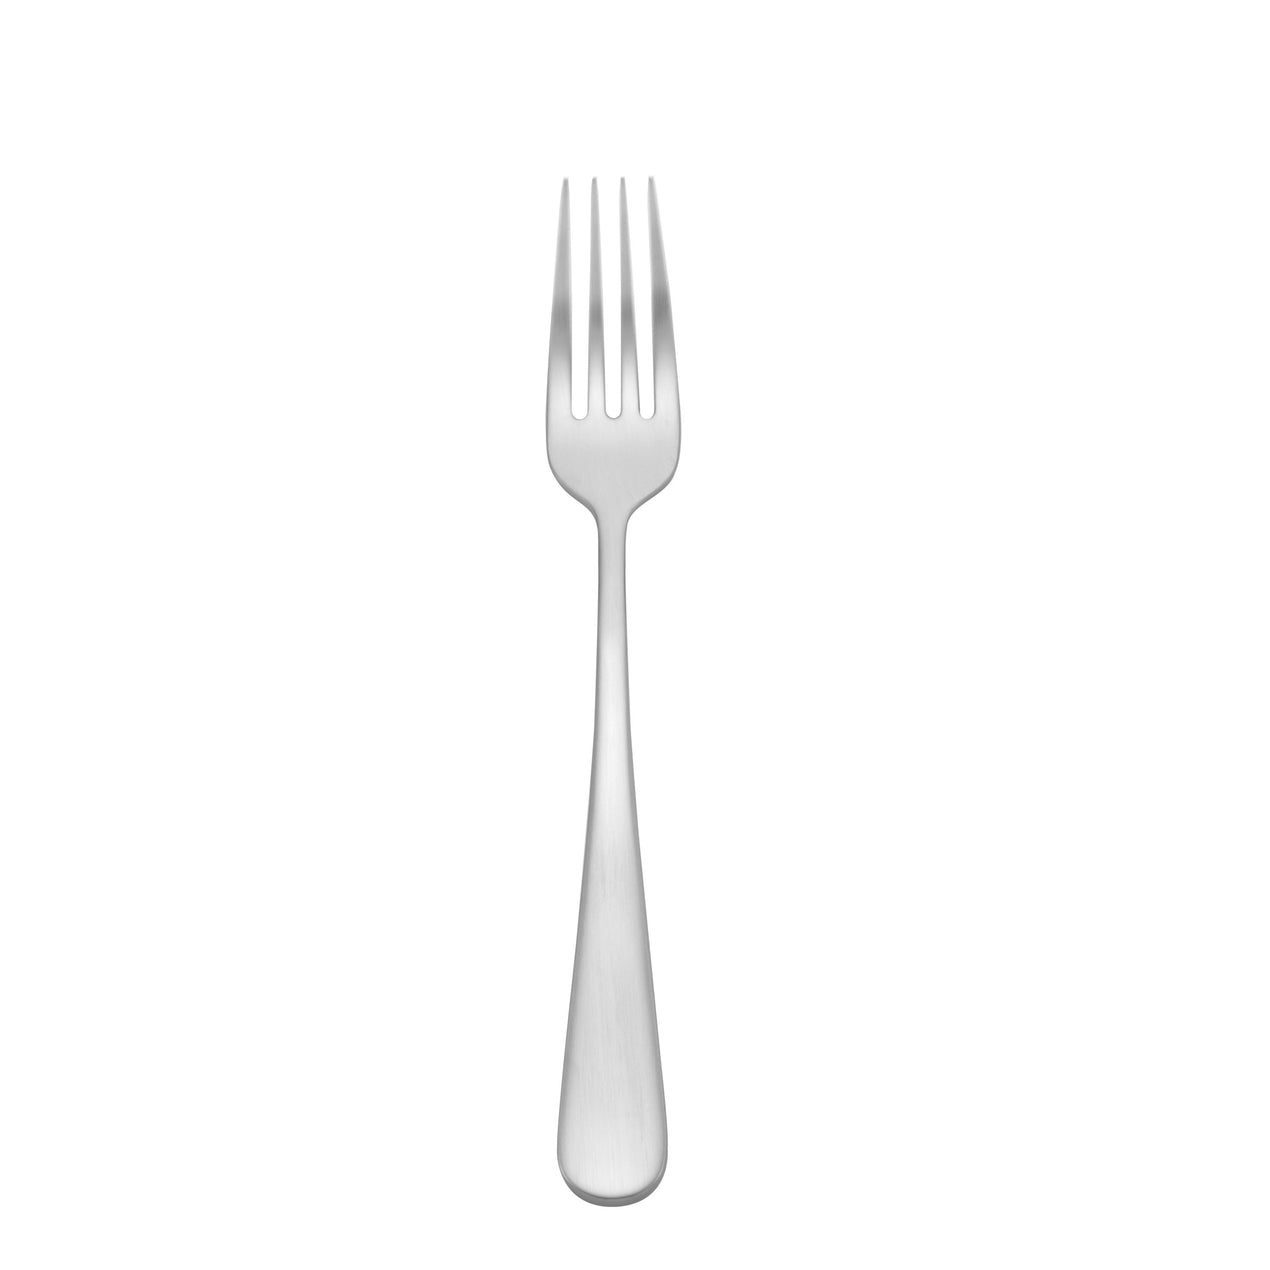 Everything you need to know about buying flatware - Reviewed